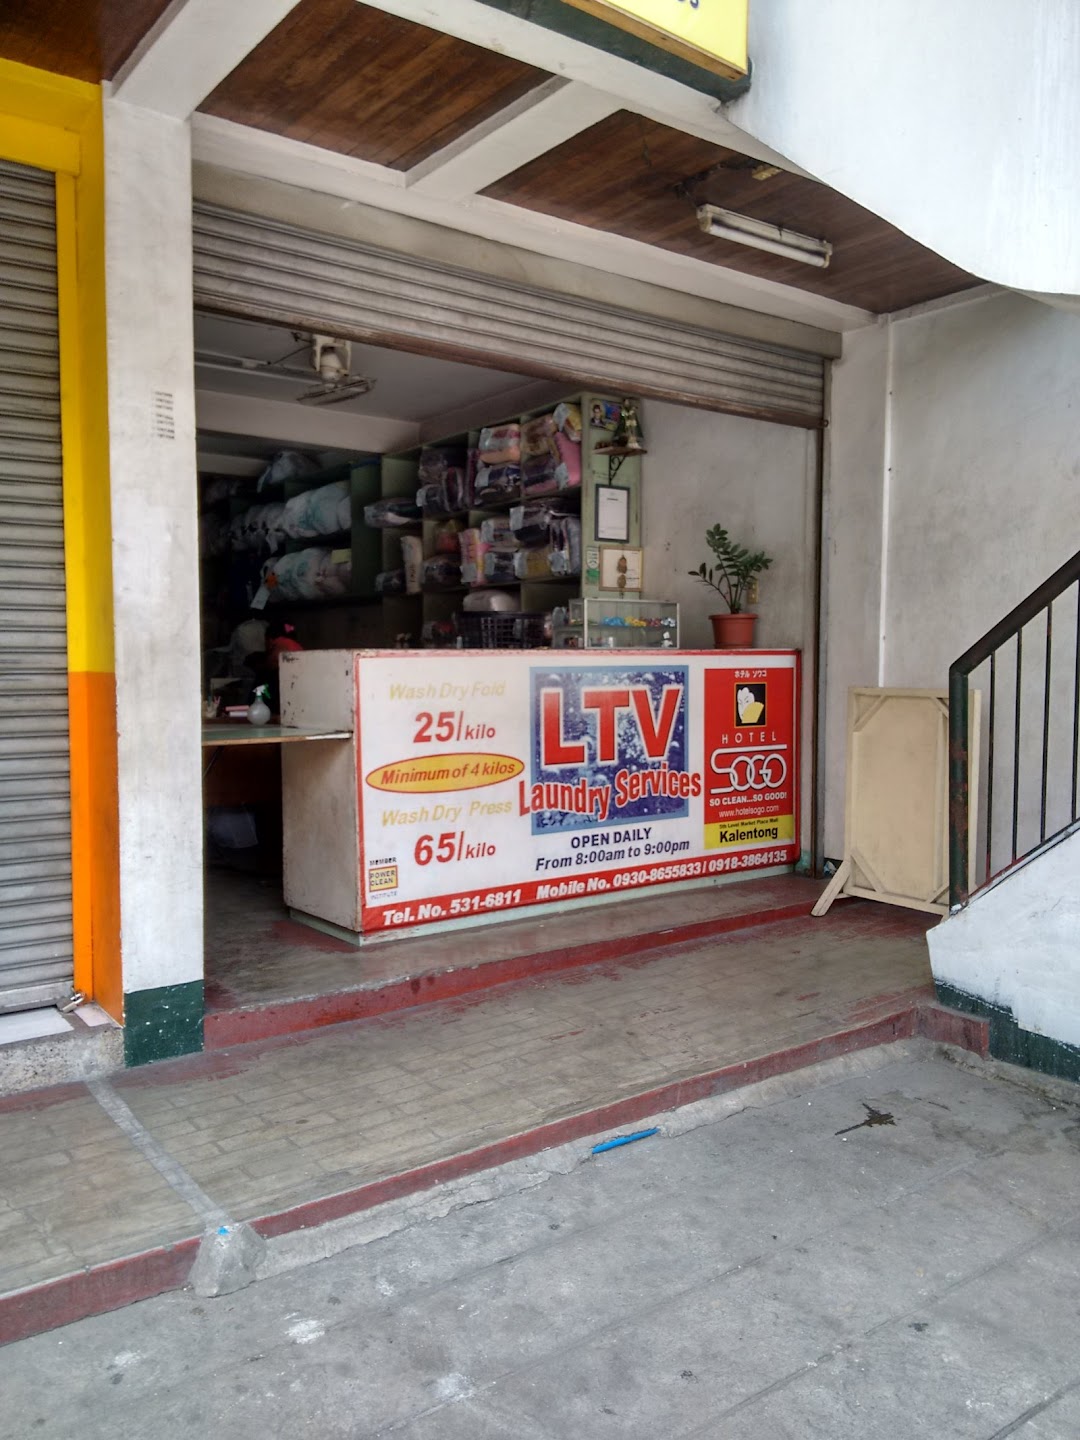 LTV Laundry Services